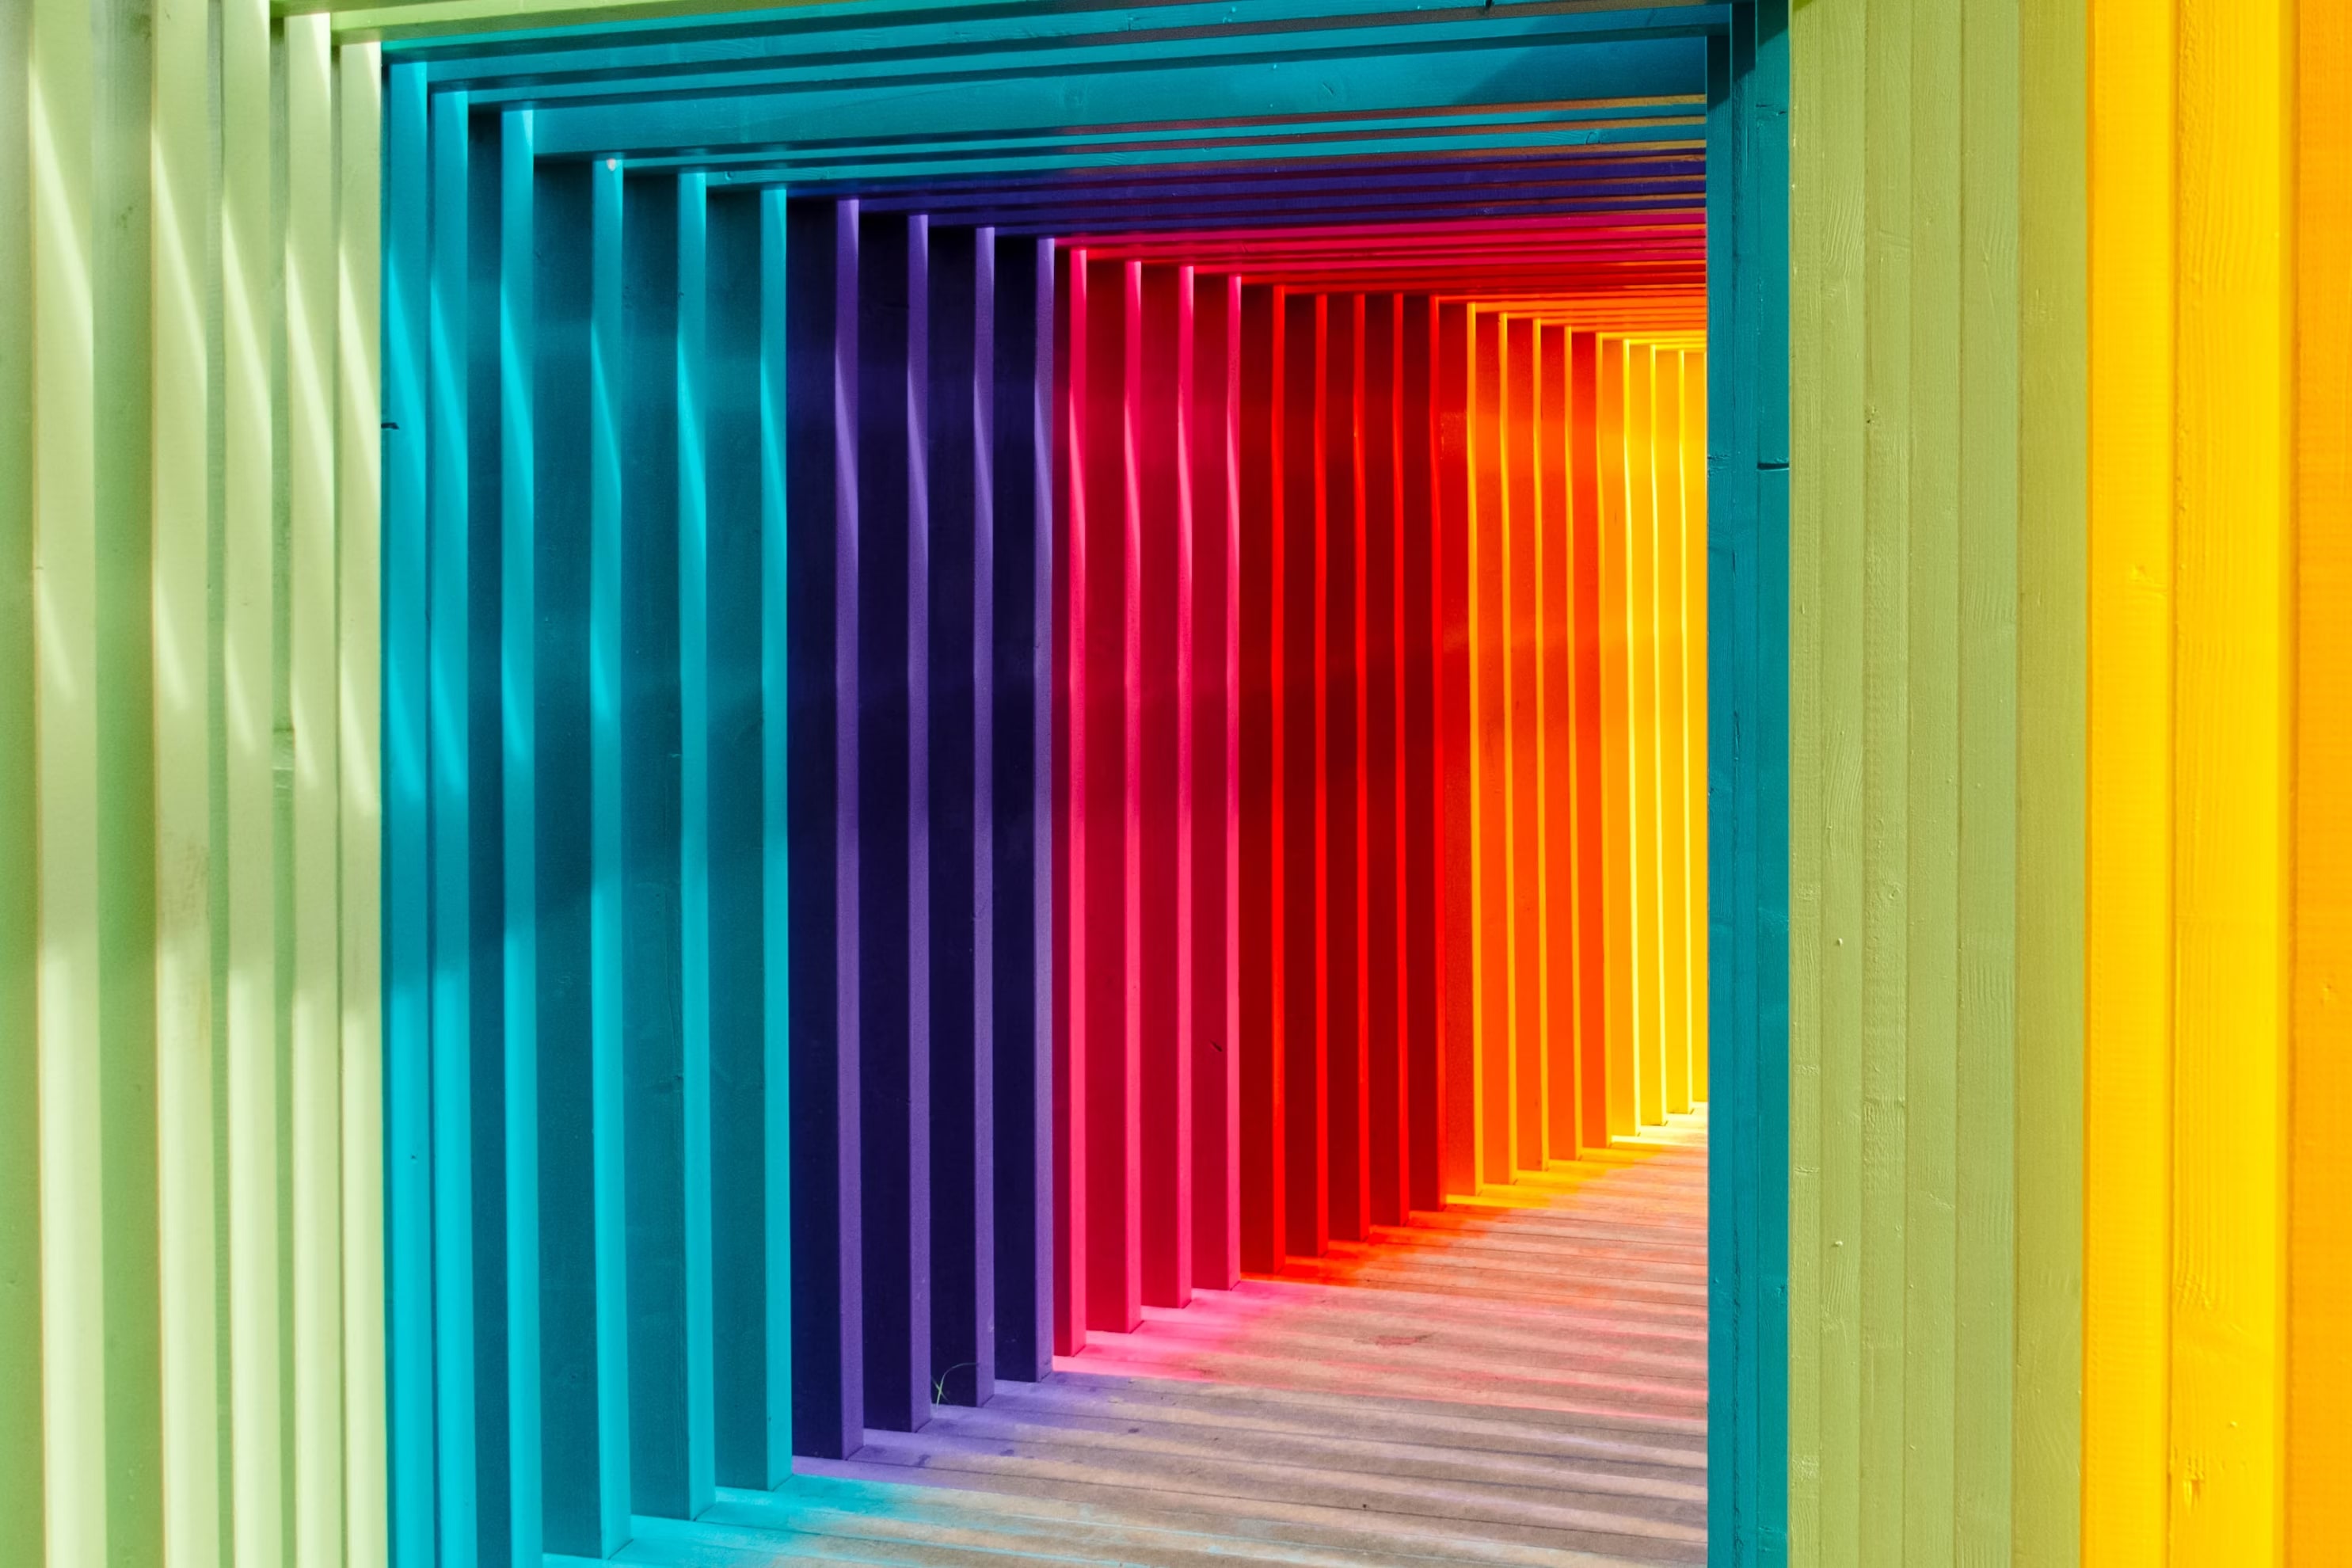 A corridor of multi-colors frames, creating a rainbow hallway, is well lit and the light is blending colors inside the corridor.